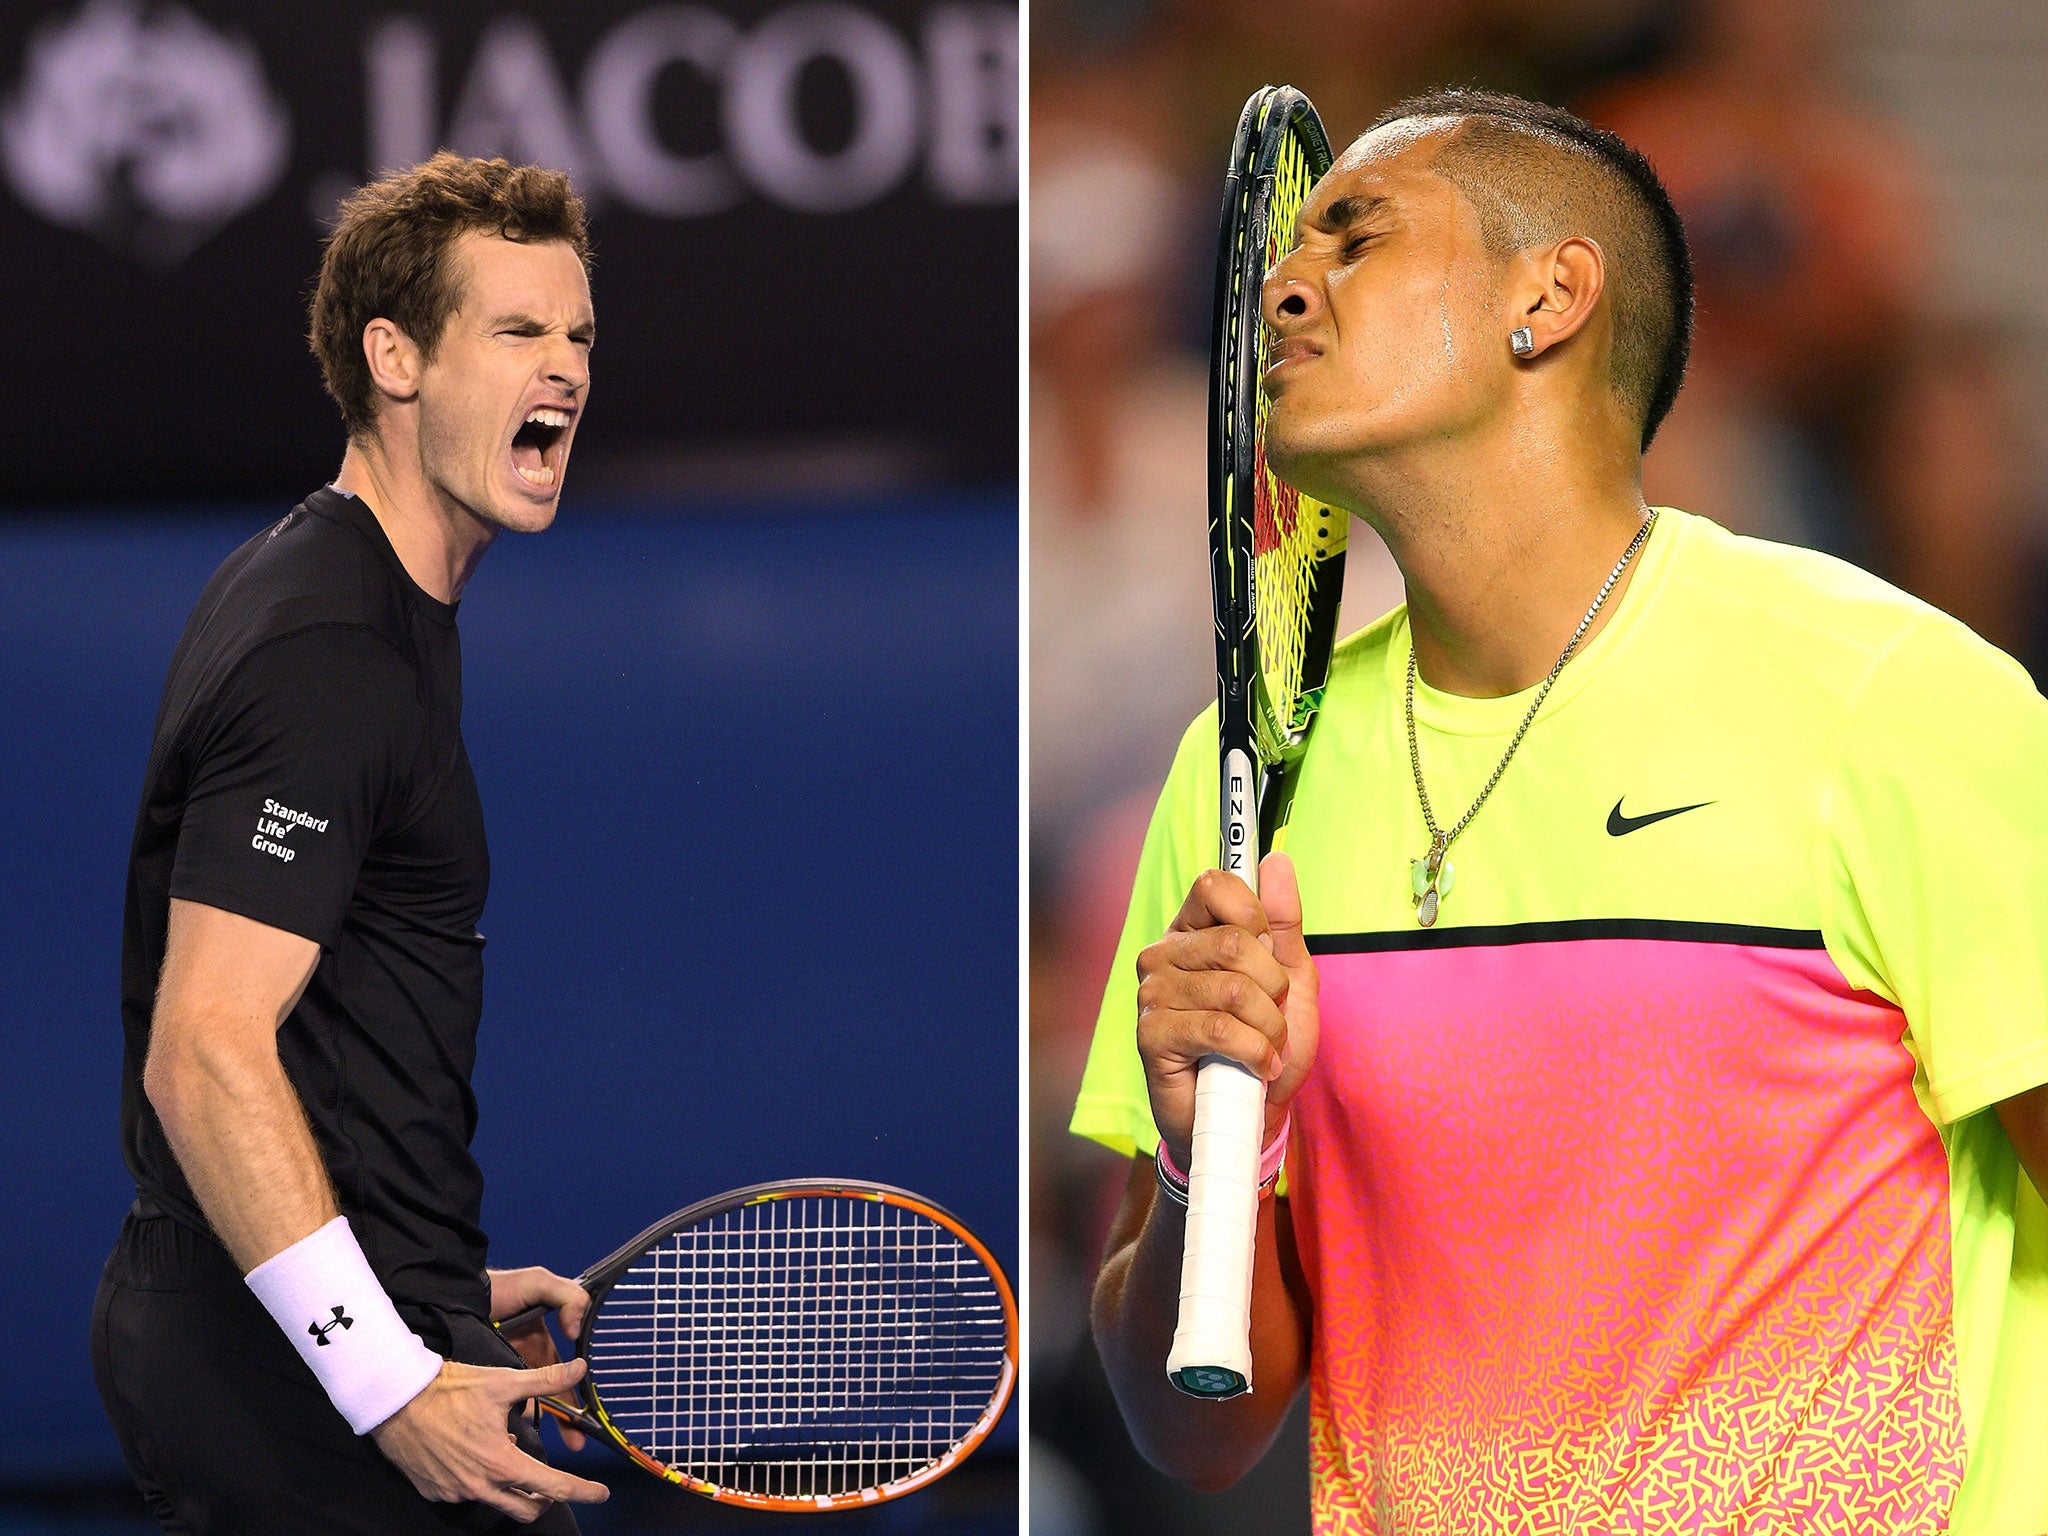 Andy Murray takes on Nick Kyrgios in the Australian Open quarter-finals